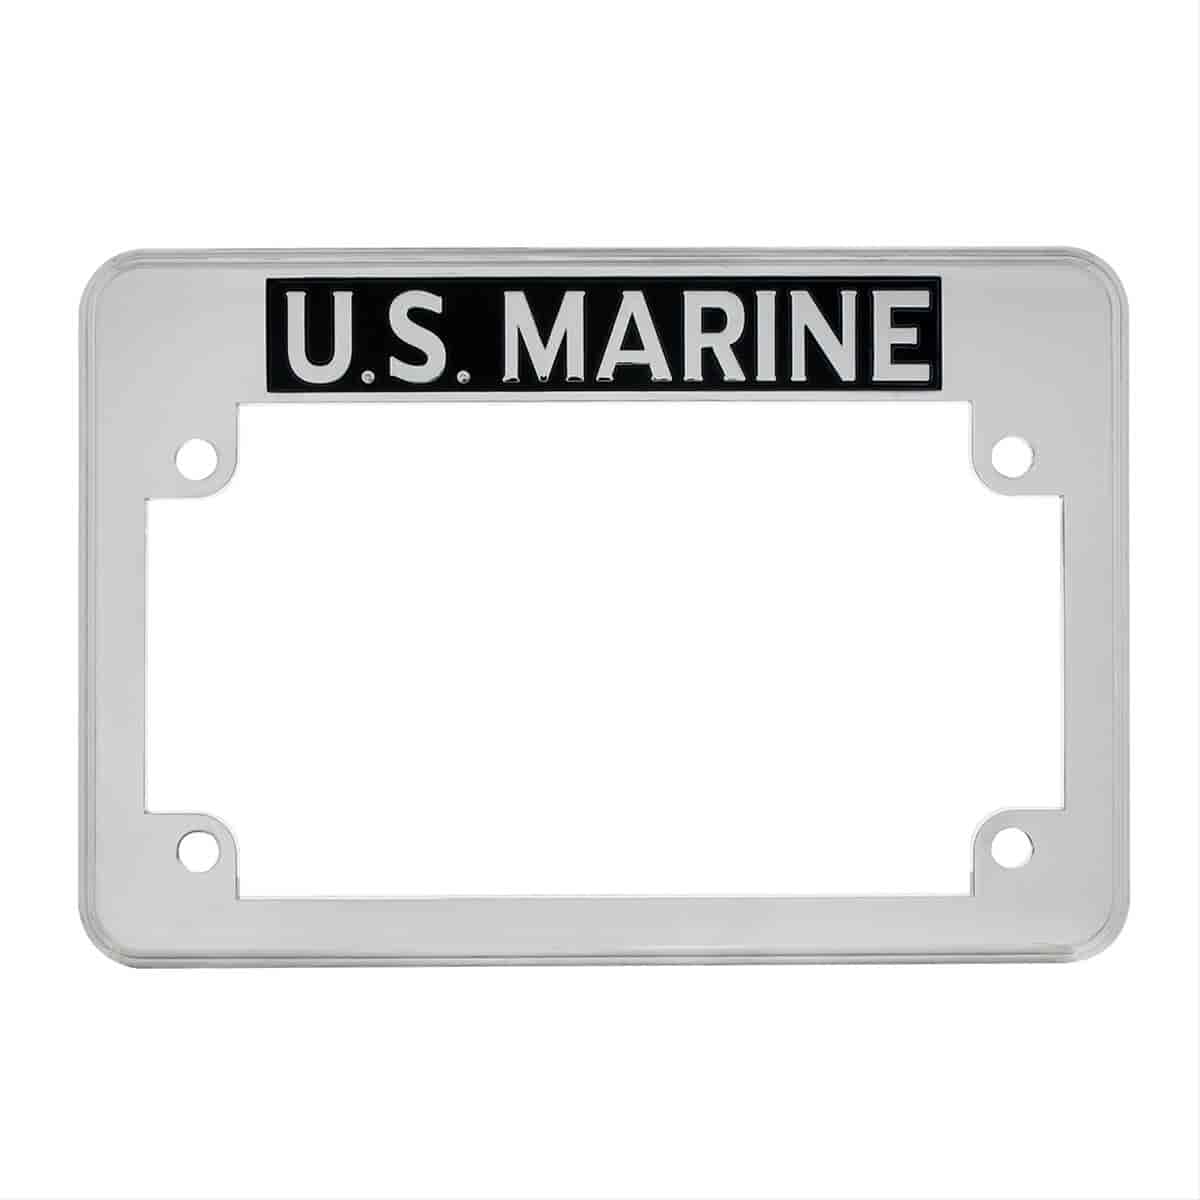 MOTORCYCLE LICENSE PLATE